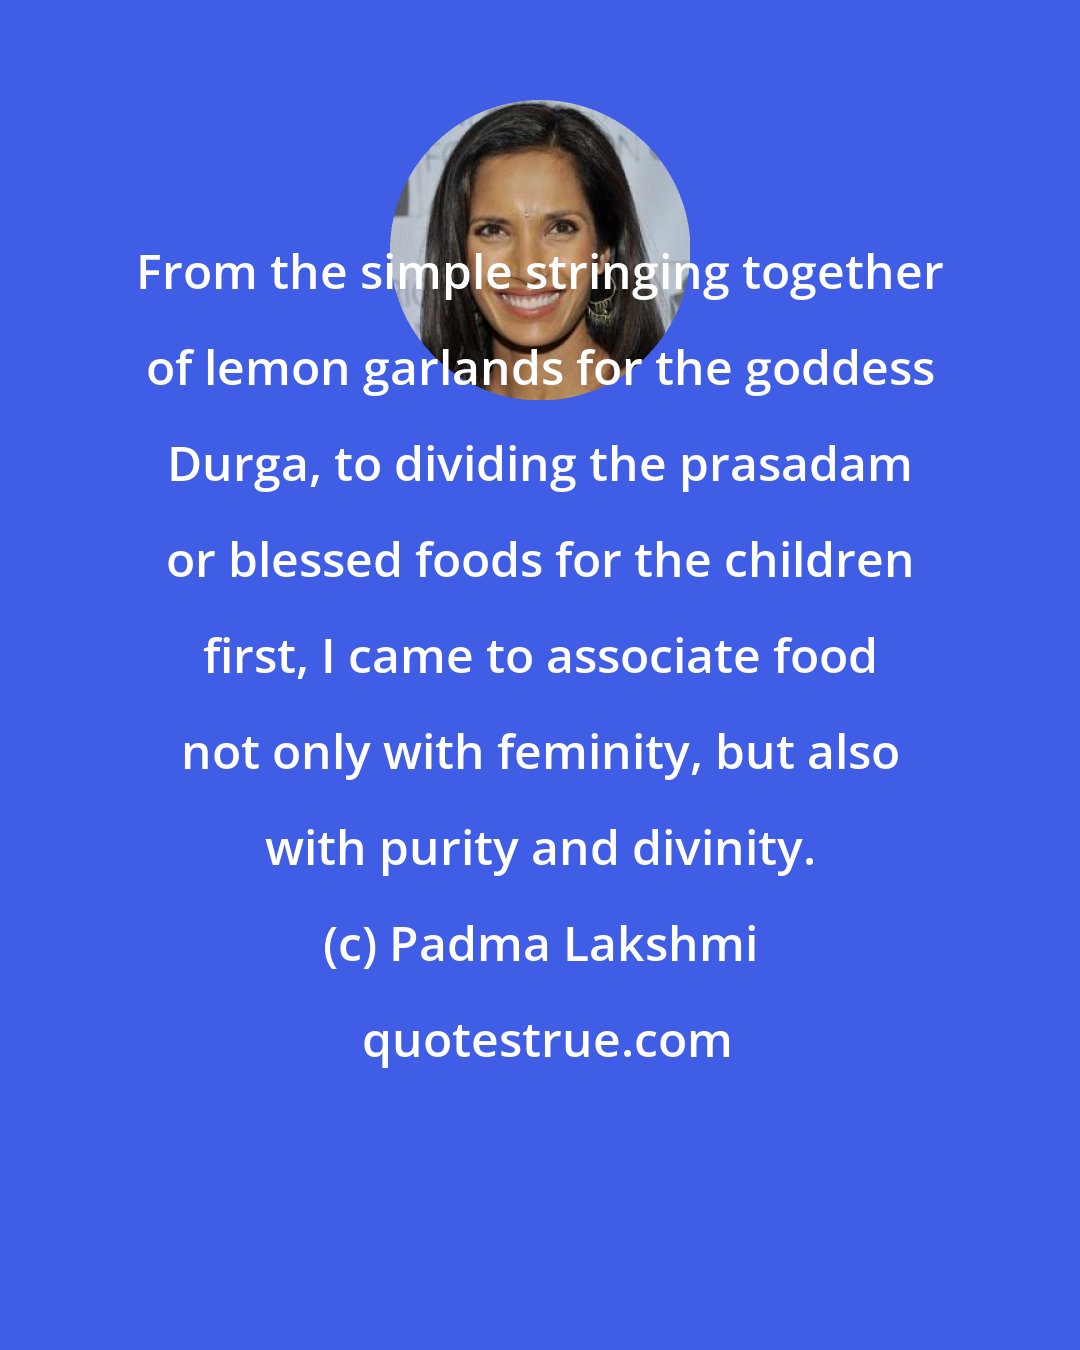 Padma Lakshmi: From the simple stringing together of lemon garlands for the goddess Durga, to dividing the prasadam or blessed foods for the children first, I came to associate food not only with feminity, but also with purity and divinity.